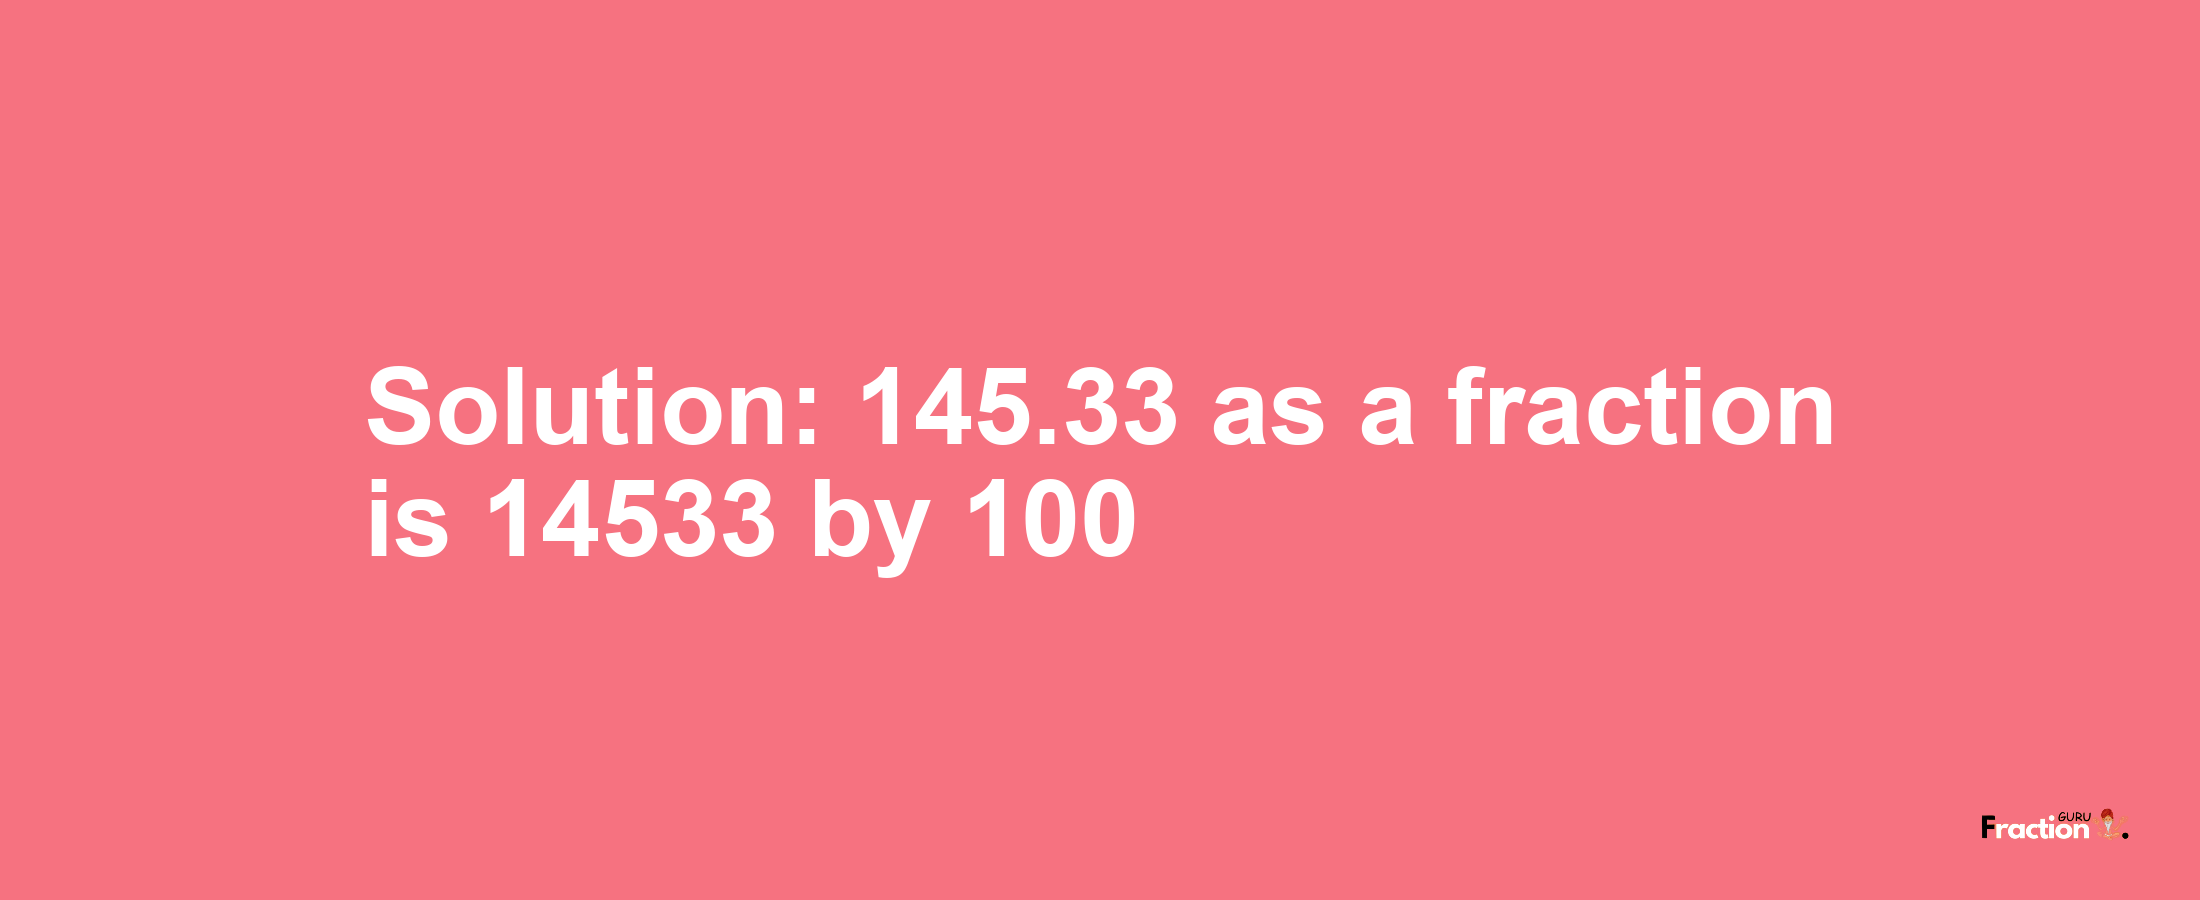 Solution:145.33 as a fraction is 14533/100